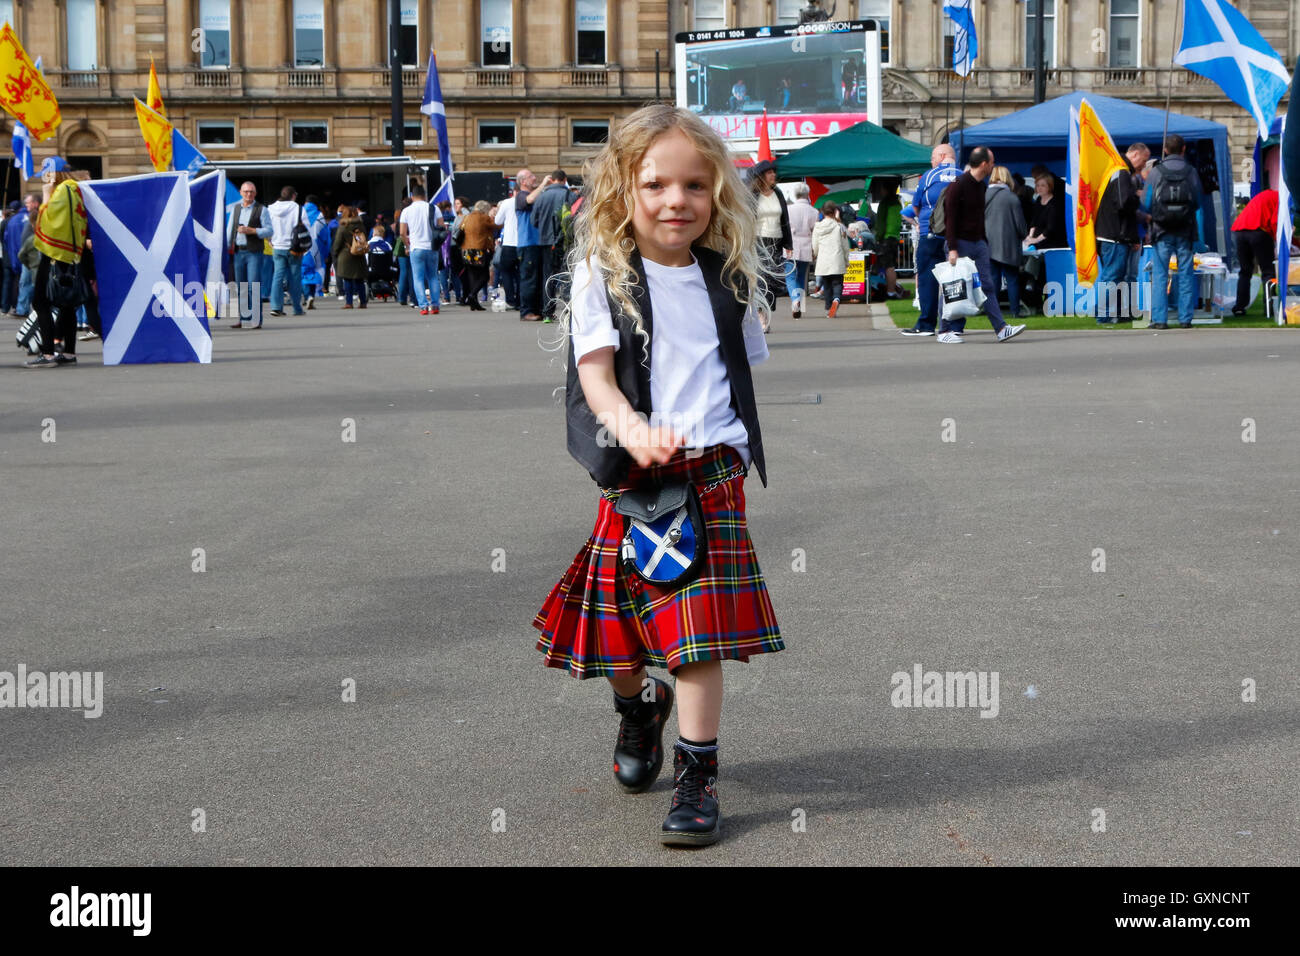 Glasgow, Scotland, UK. 17th September, 2016. Approximately 300 people attended at rally in George Square, Glasgow, organsed by the 'Wings Over SCotland' Pro-Scottish Independence group to remember the failed referendum vote, held in September 2014, for Scottish Independence from the United Kingdom. At the referendum the vote was 45% 'Yes' and 55% 'No', but this pressure group continues to lobby for a second referendum while giving support to the independence of Catalonia from Spain. Credit:  Findlay/Alamy Live News Stock Photo